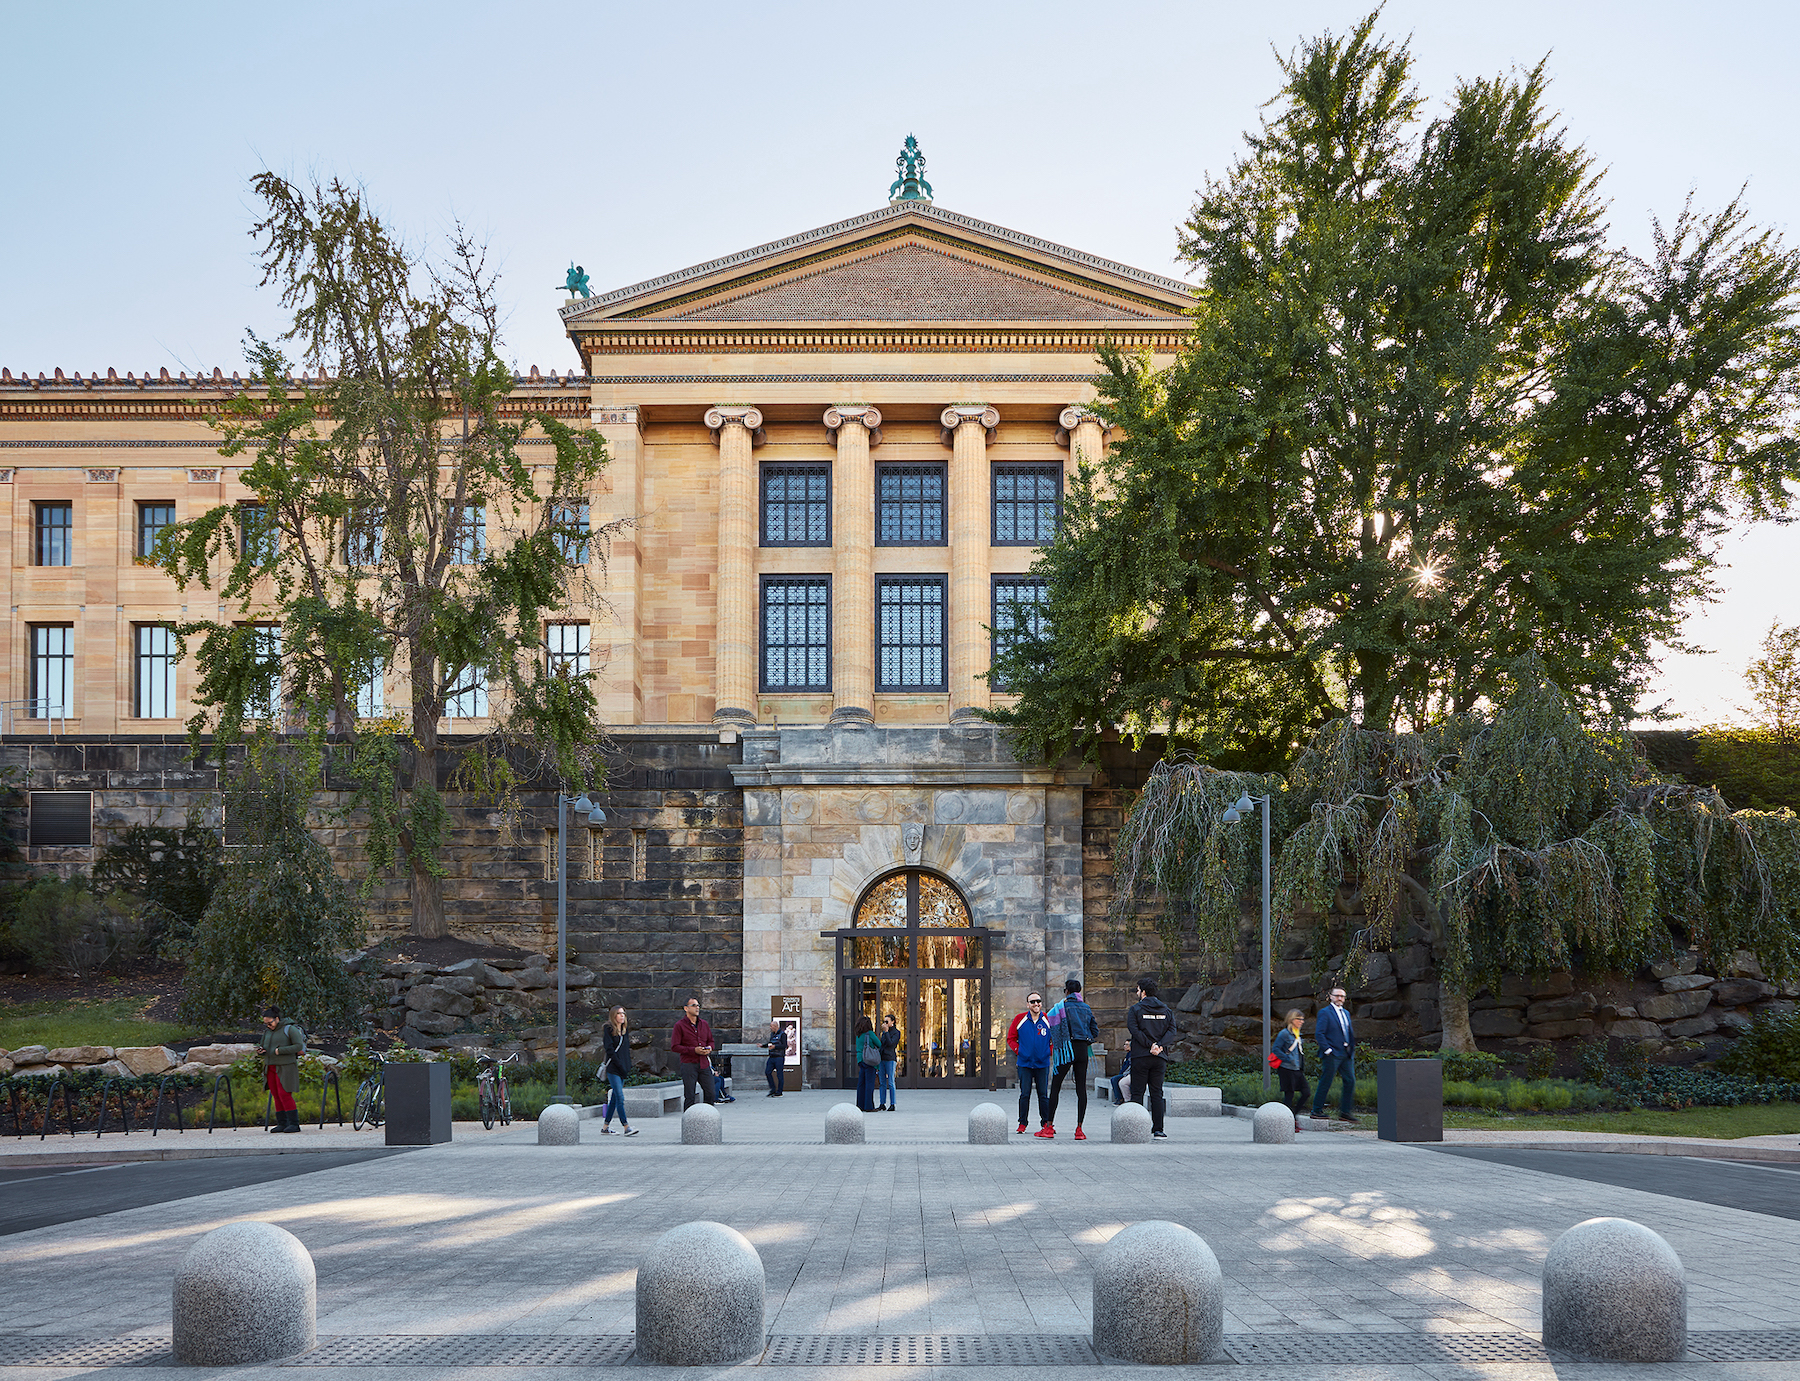 The Philadelphia Museum of Art underwent an extensive reconstruction that focused on its infrastructure and core. Images: Steve Hall@Hall + Merrick Photographers; Elizabeth Leitzell